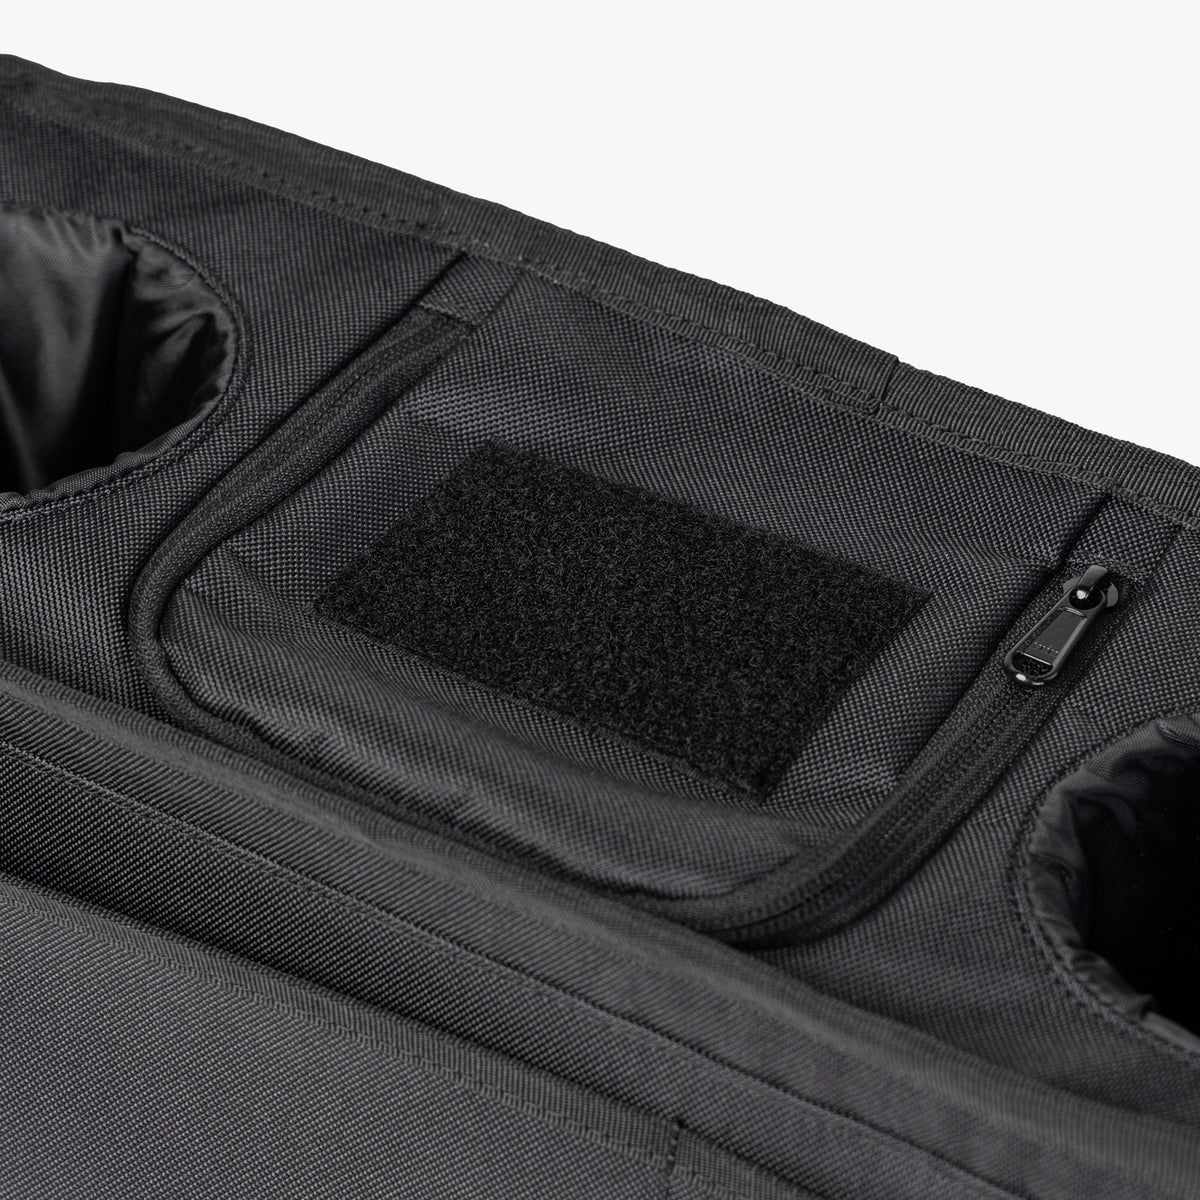 Reviewing The Universal Stroller Organizer